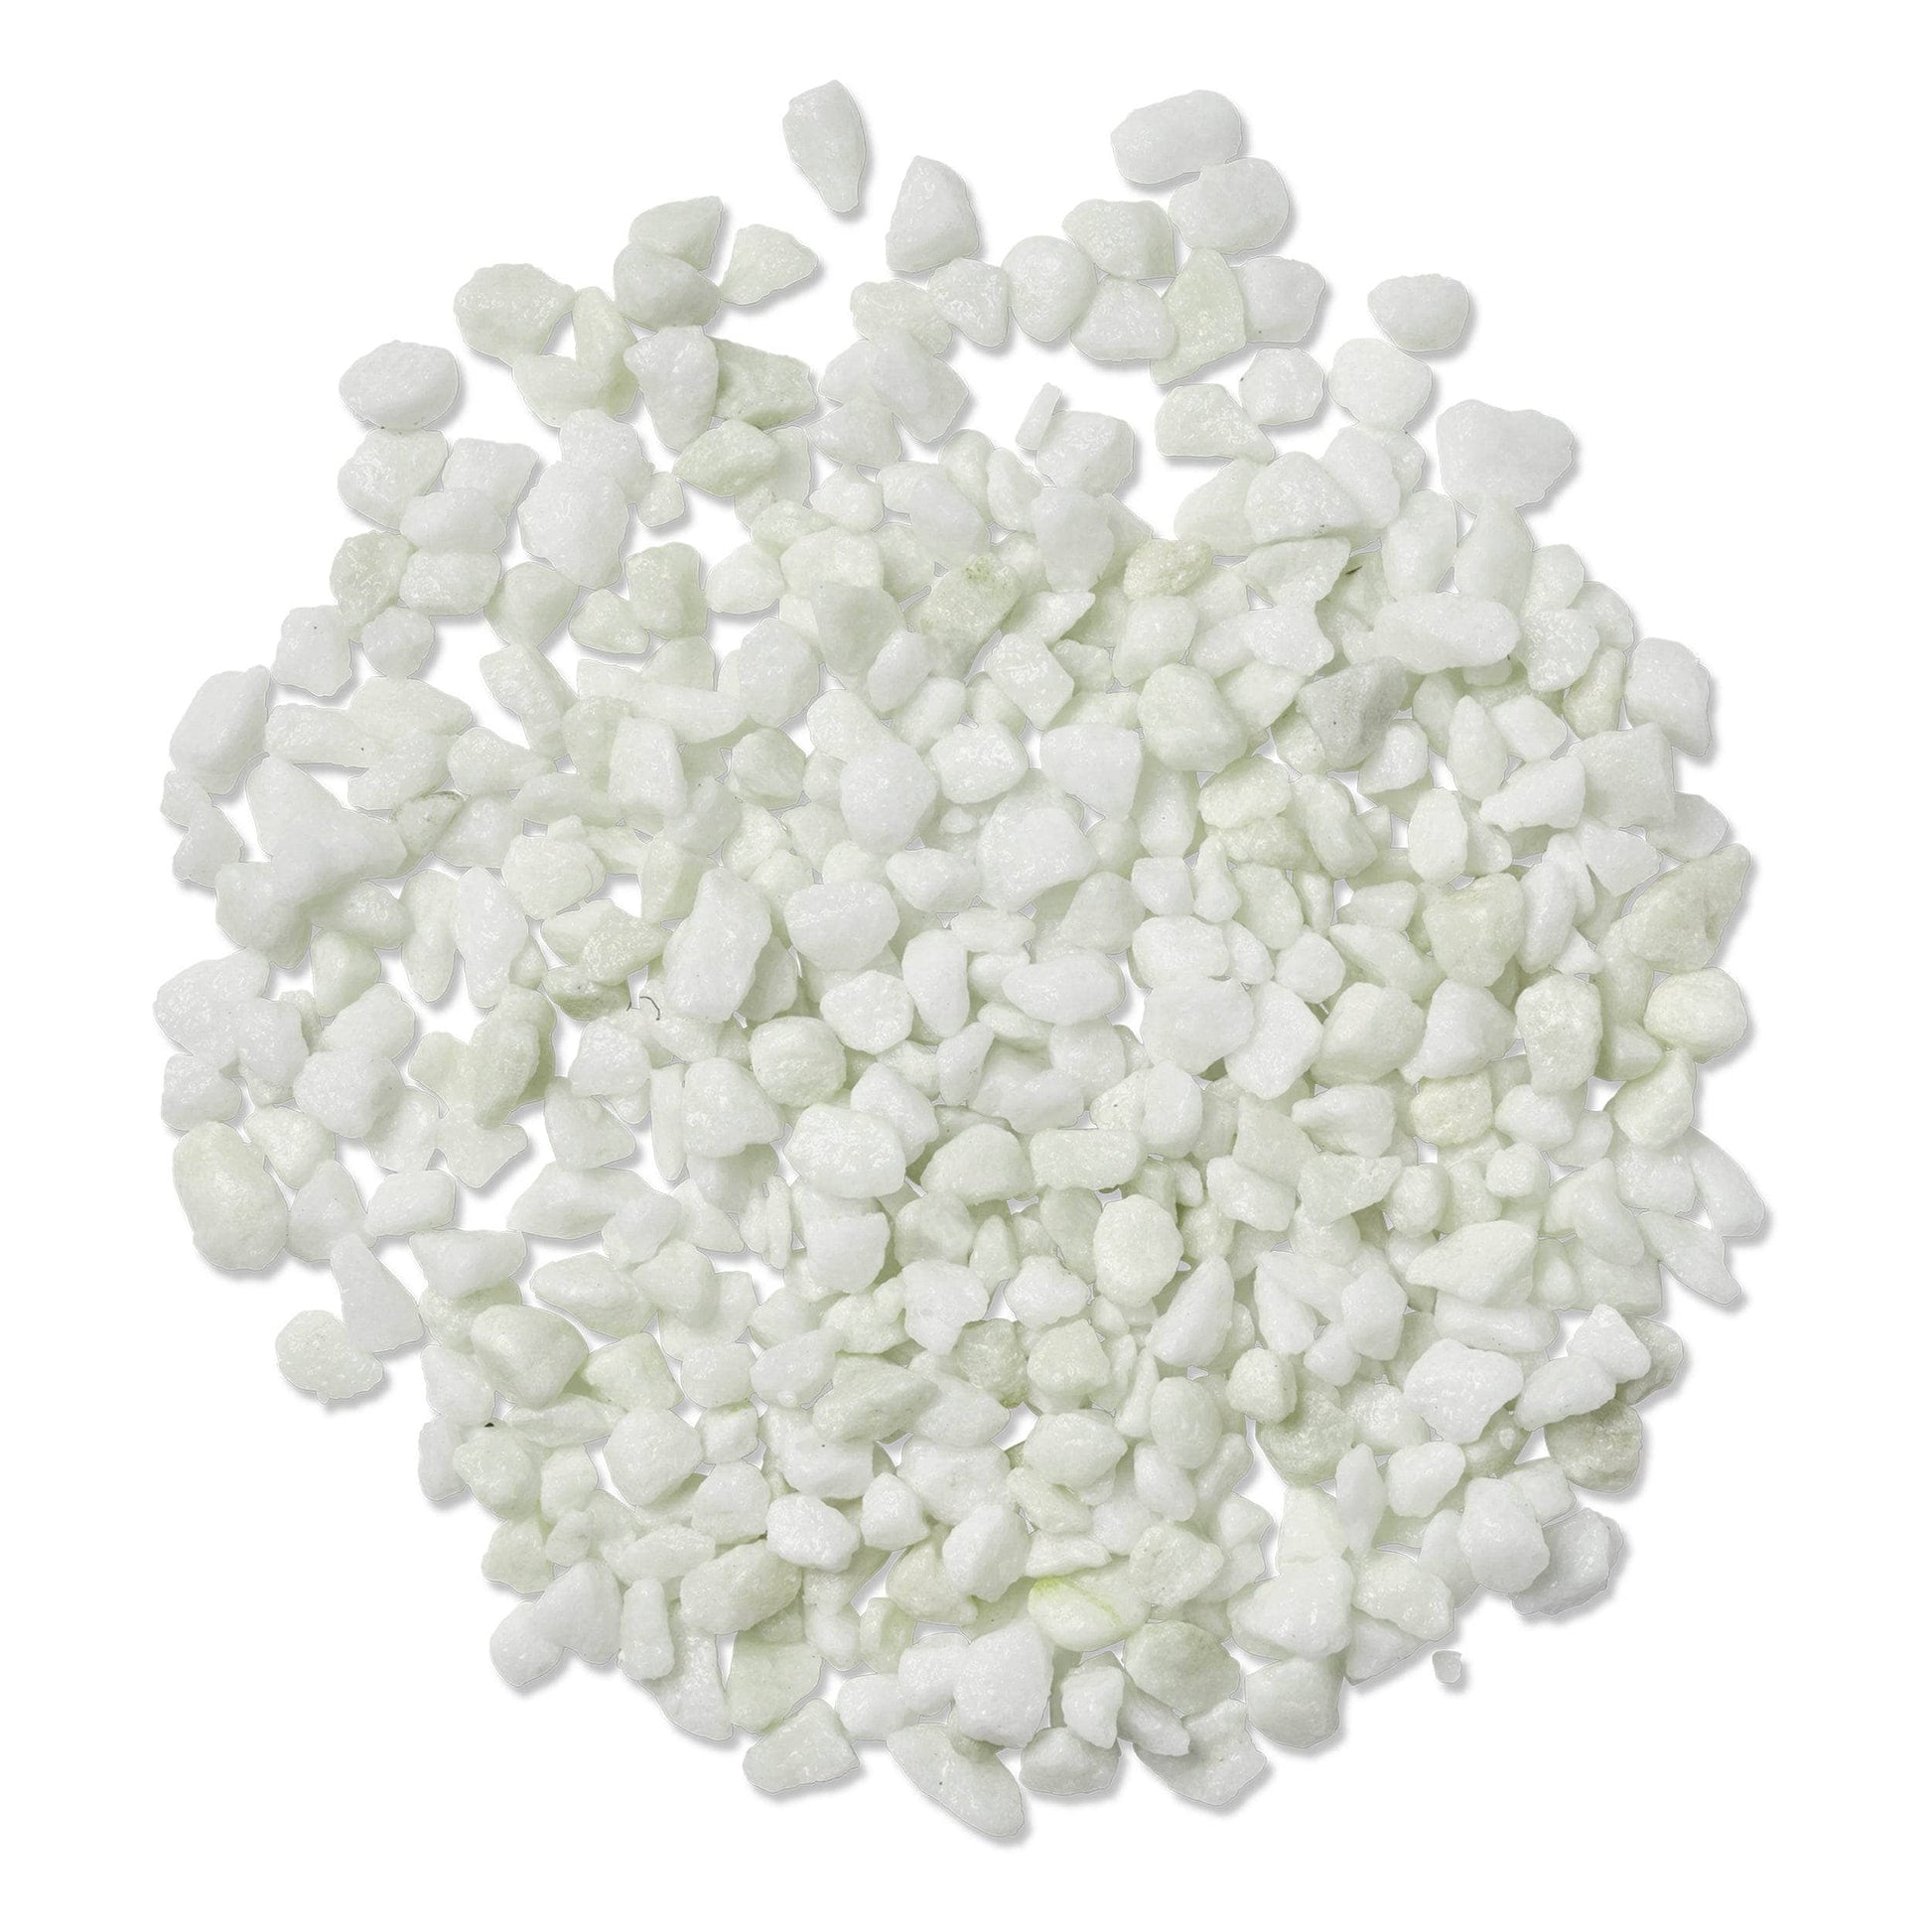 Gardening  -  Altico A10018 Classic White Stone Chippings 20mm  -  60006033